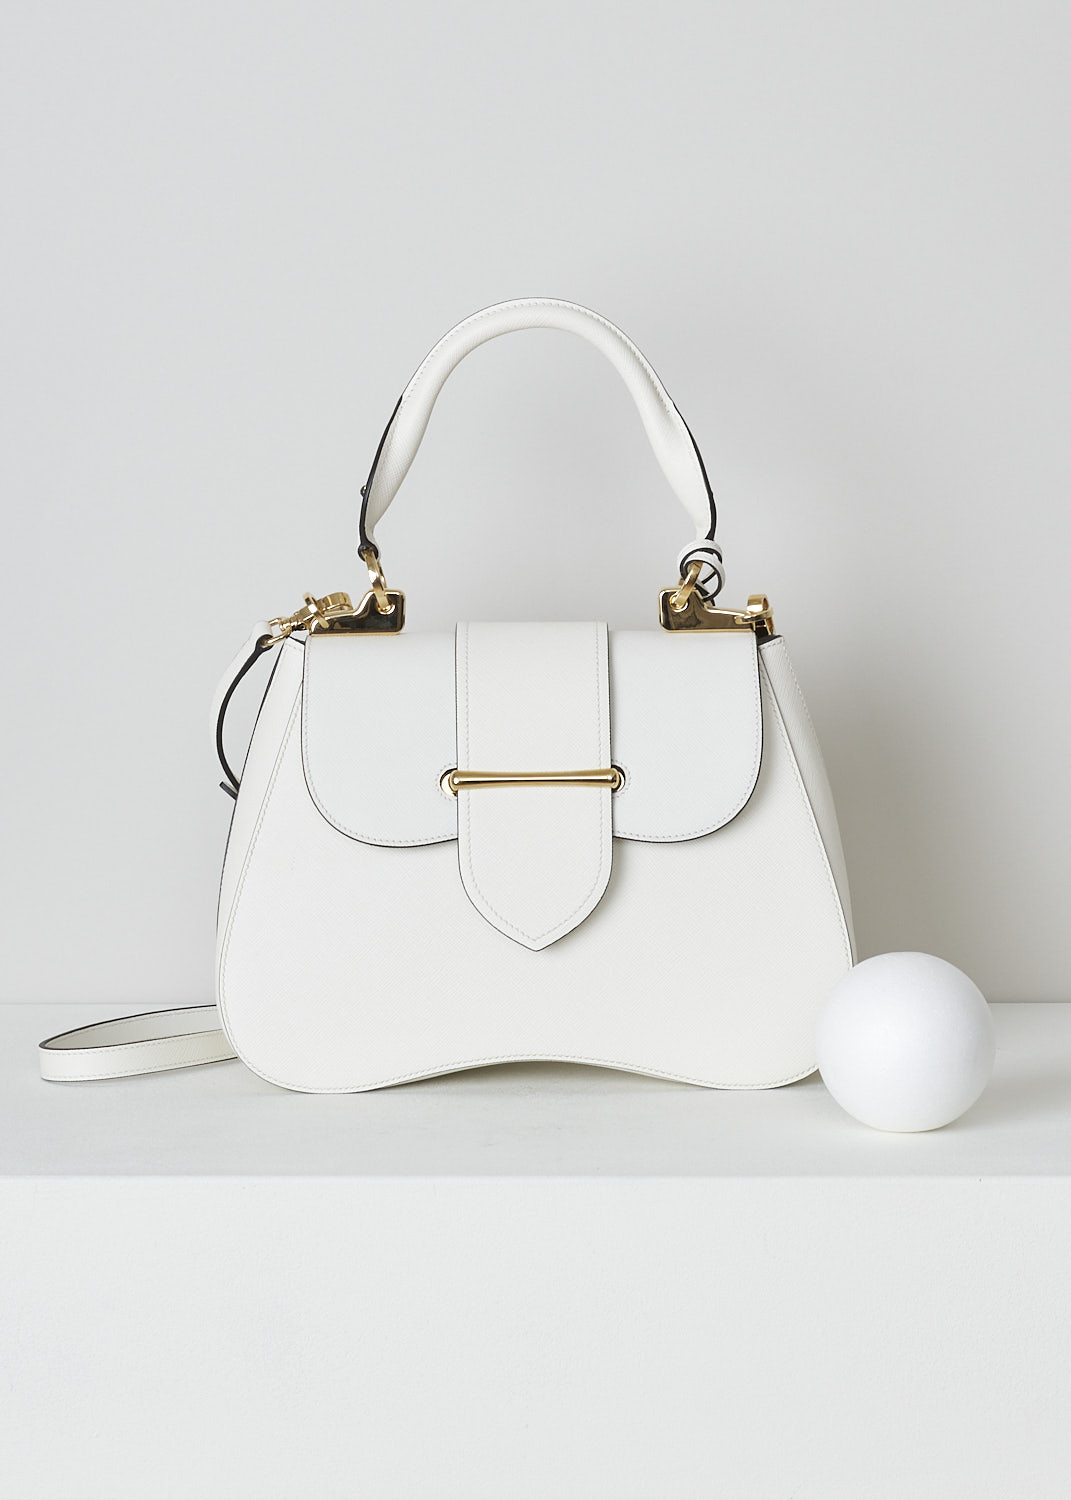 PRADA, MEDIUM SIDONIE TOP HANDLE BAG IN WHITE, CARTELLA_1BN005_F0009_BIANCO, White, Front, This mid-sized white Sidonie Top Handle Bag is made with Saffiano leather. The bag comes with a leather handle and an adjustable and detachable shoulder strap. The bag has gold-tone metal hardware with the brand's logo on the back. The removable leather keychain has that same gold-tone logo on it. The slip-through closure opens up to reveal its black interior. The bag has a single, spacious compartment with a zipped inner pocket to one side and a patch pocket on the other side.  
